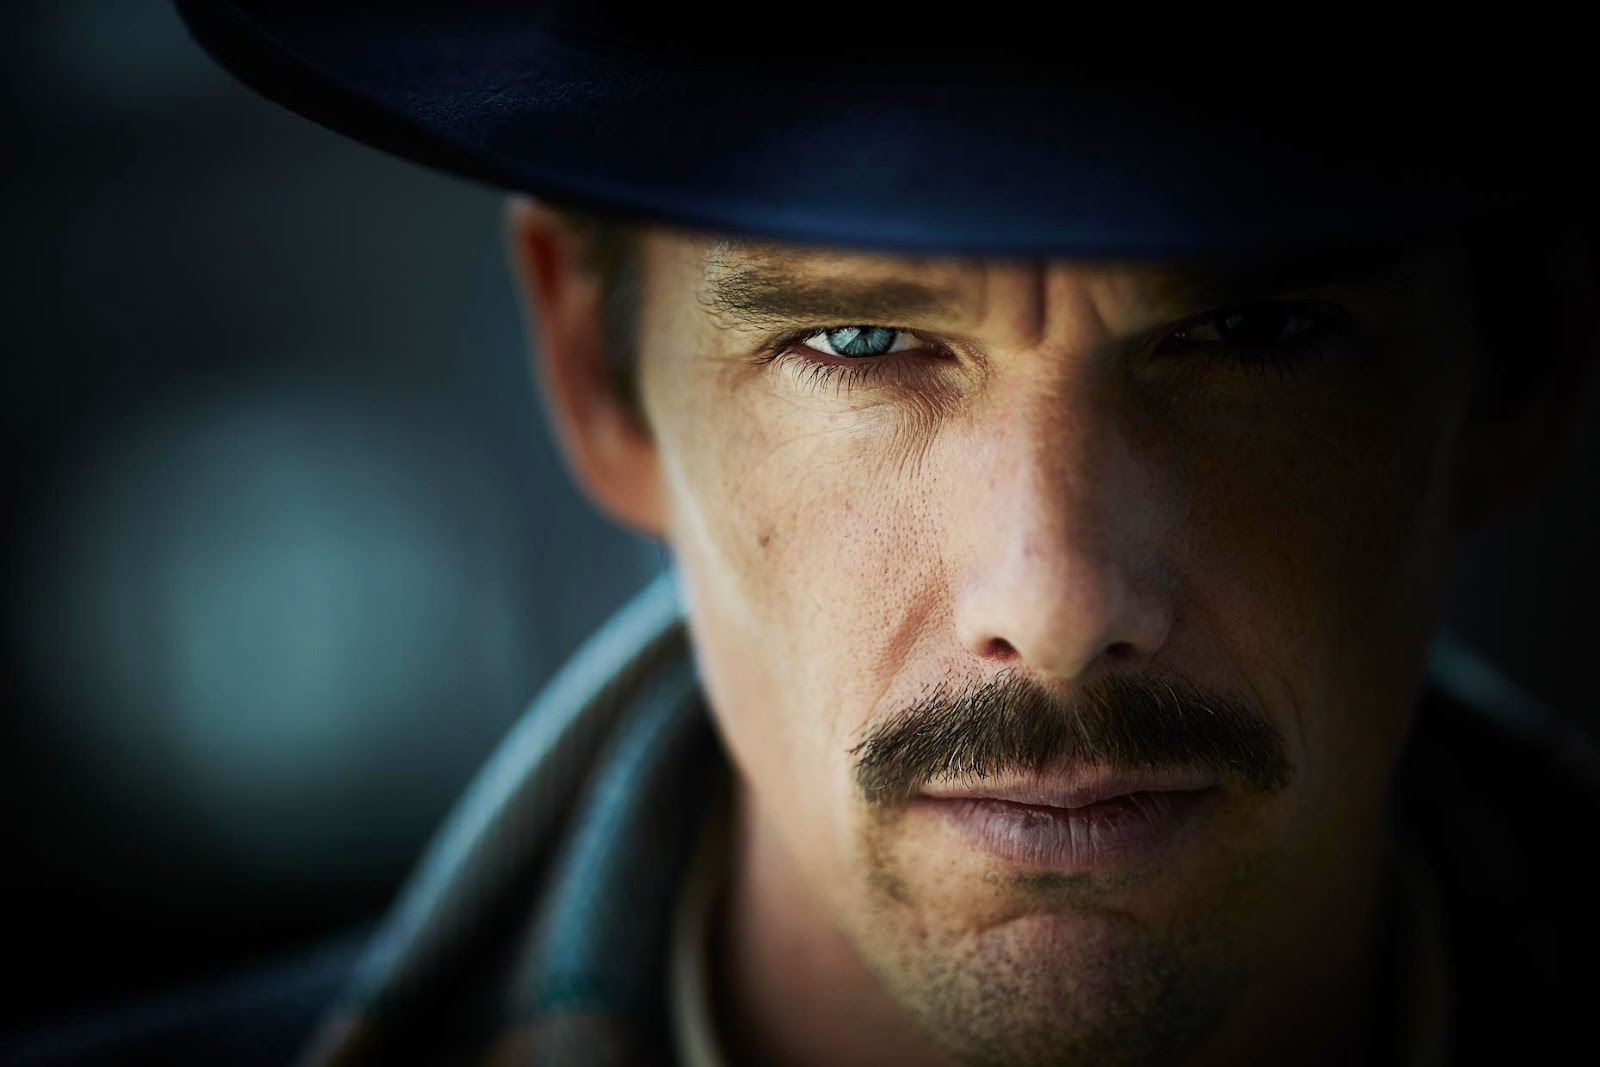 Ethan Hawke on “Predestination” and His Favorite Science Fiction